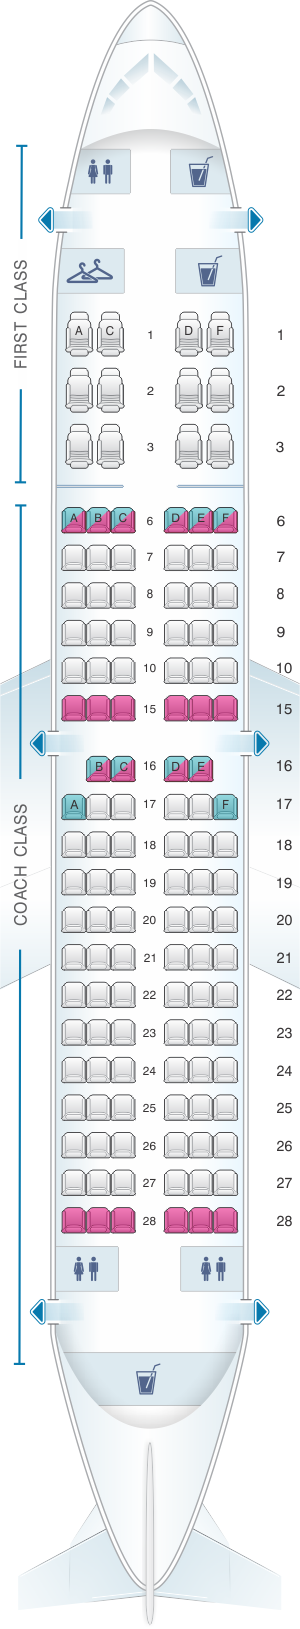 Alaska Airlines Embraer E175 Seating Chart